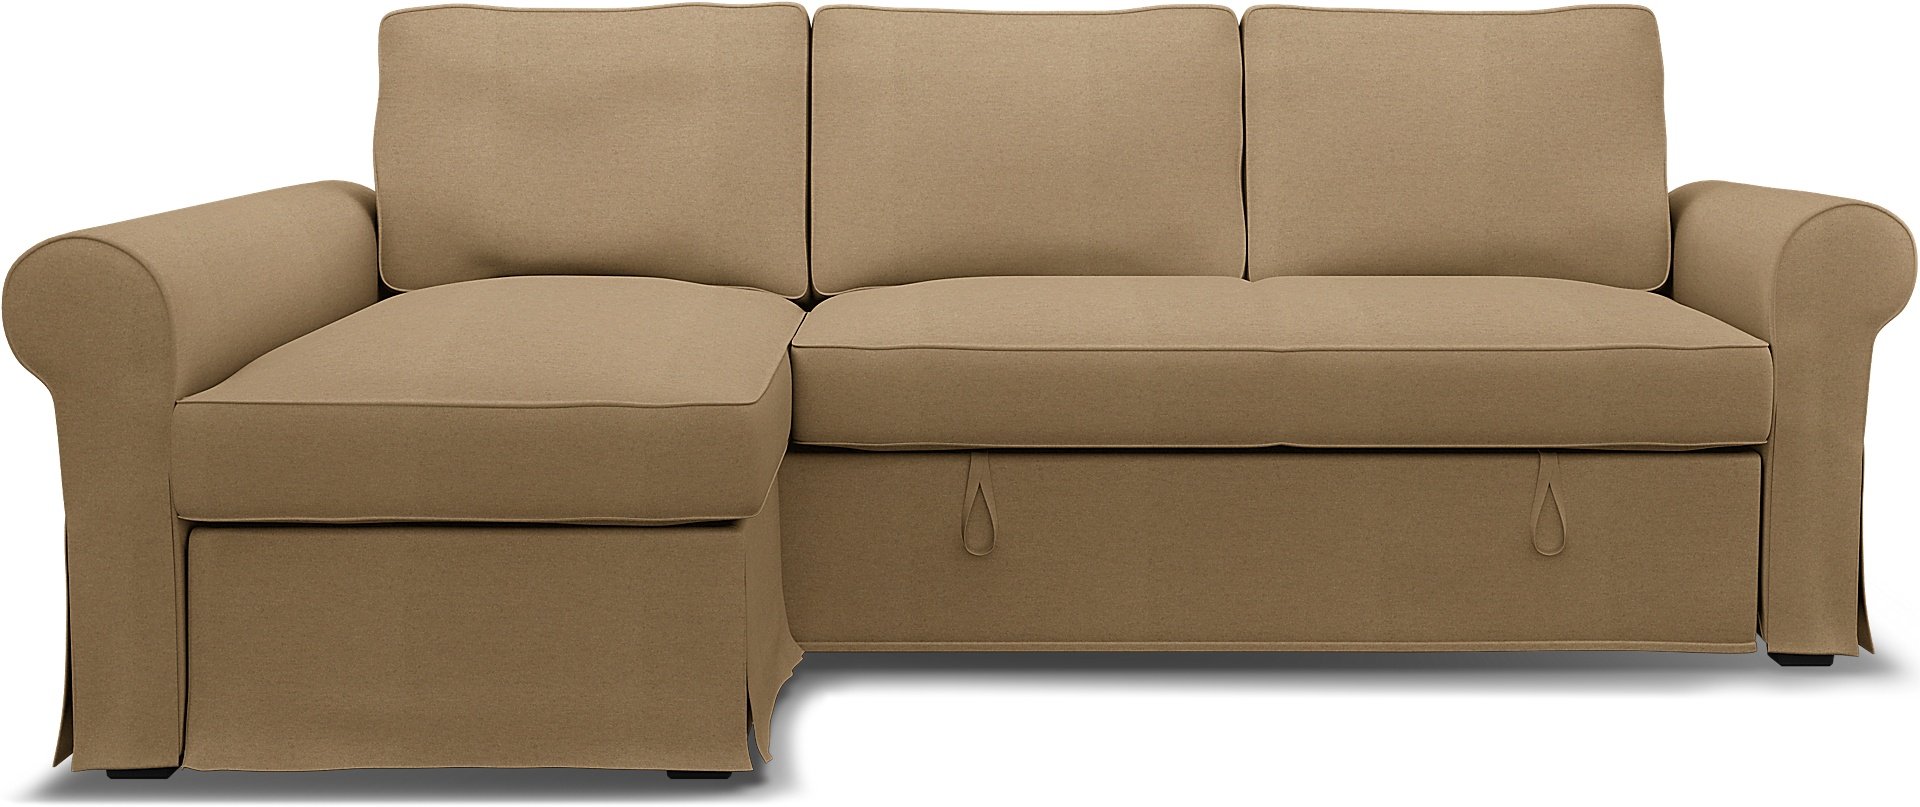 IKEA - Backabro Sofabed with Chaise Cover, Sand, Wool - Bemz